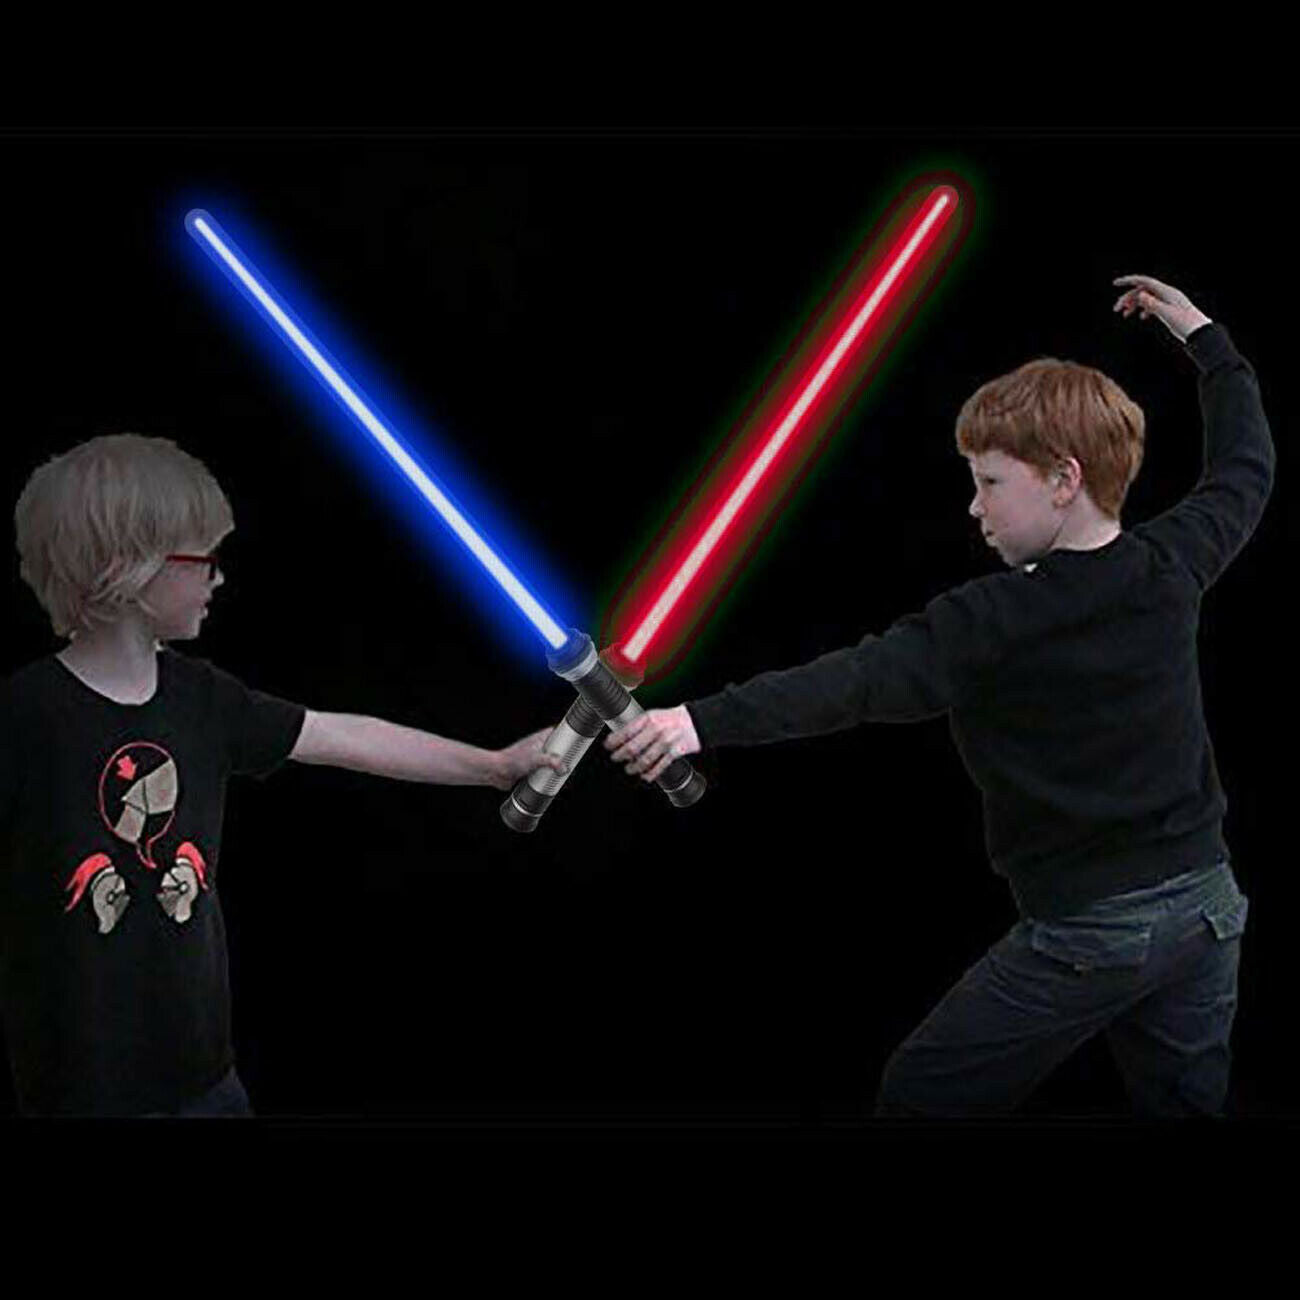 2x 2 in 1 LED 7 Colors FX Dual Saber & Sound (Motion Sensitive) For Kid Presents